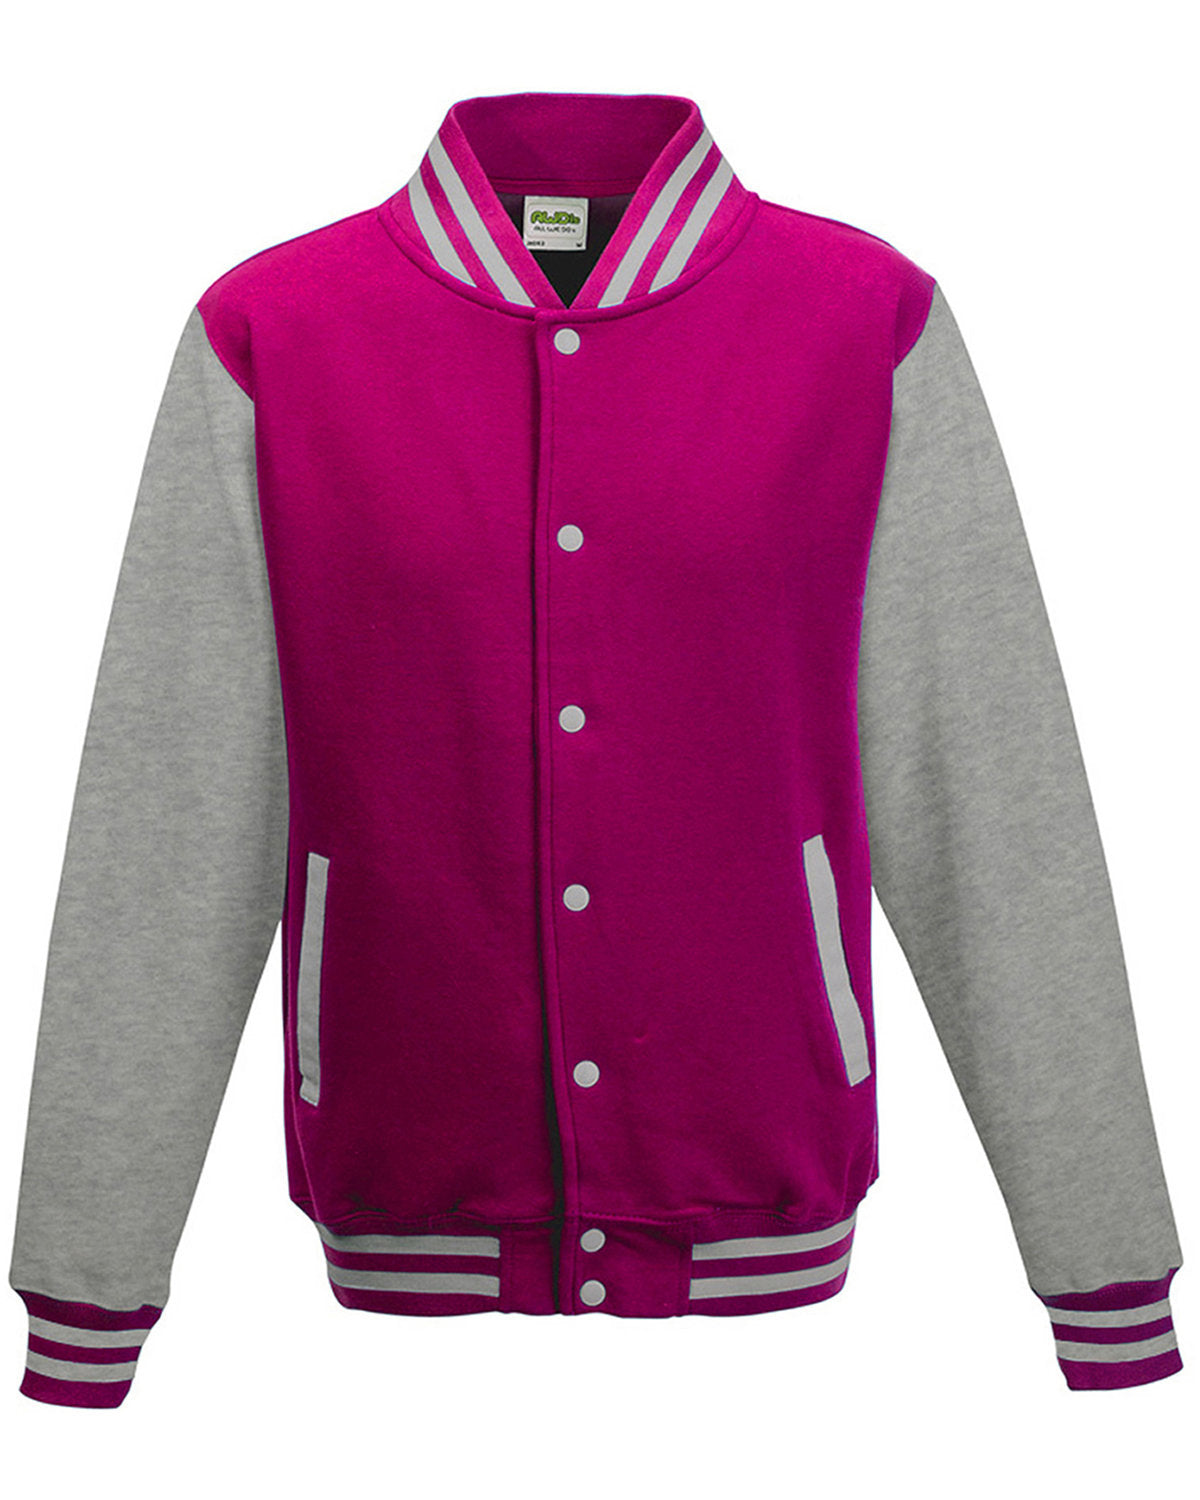 Just Hoods By AWDis Adult Letterman Jacket Hot Pink and Grey